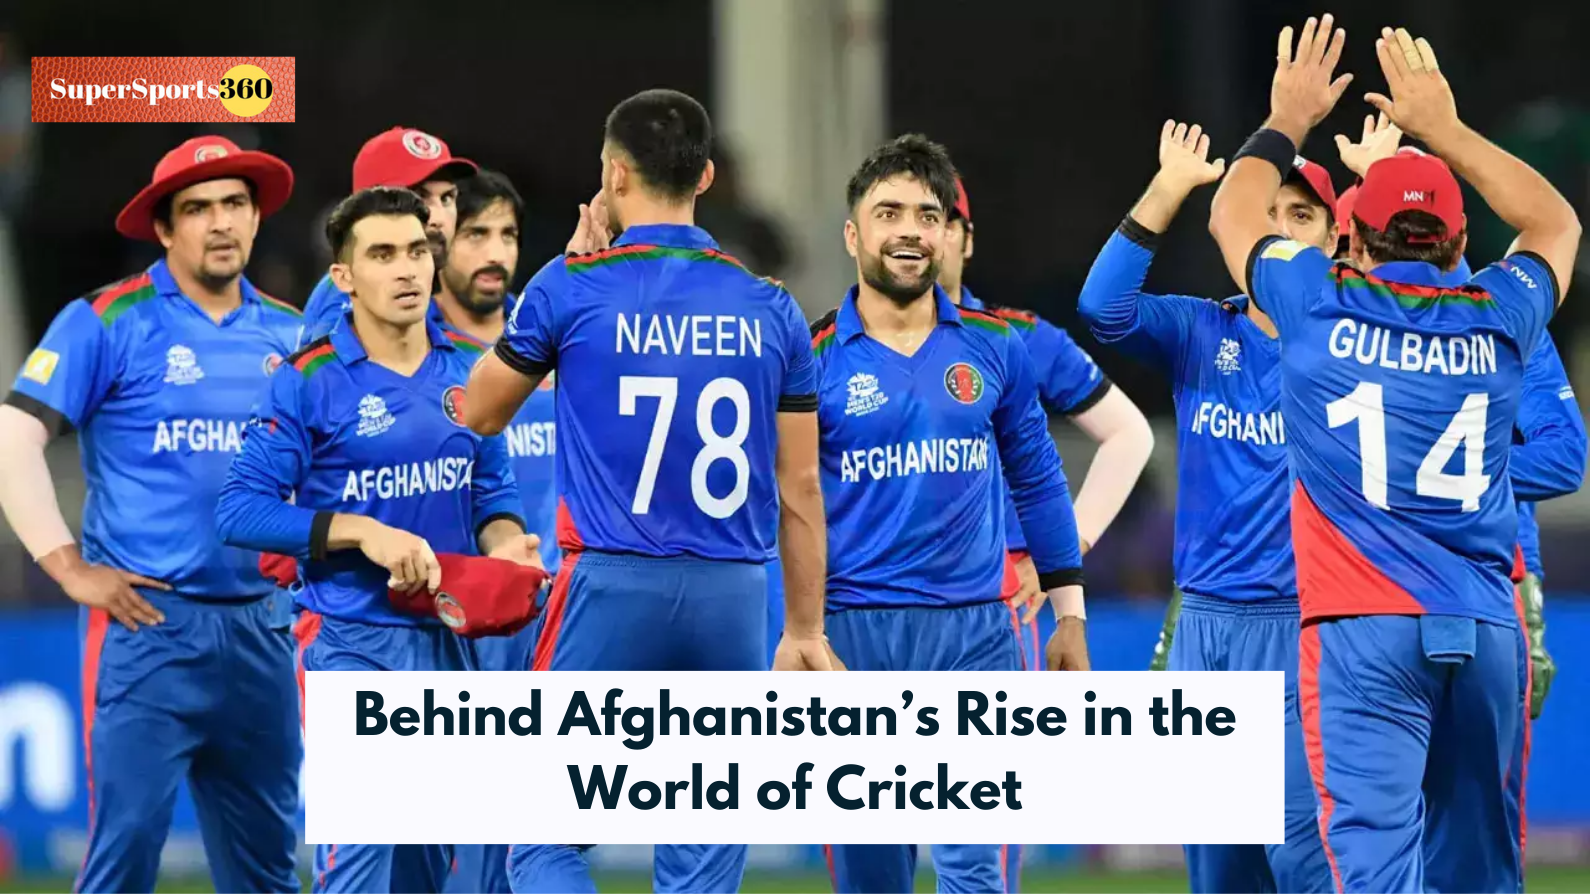 Behind Afghanistan’s Rise in the World of Cricket